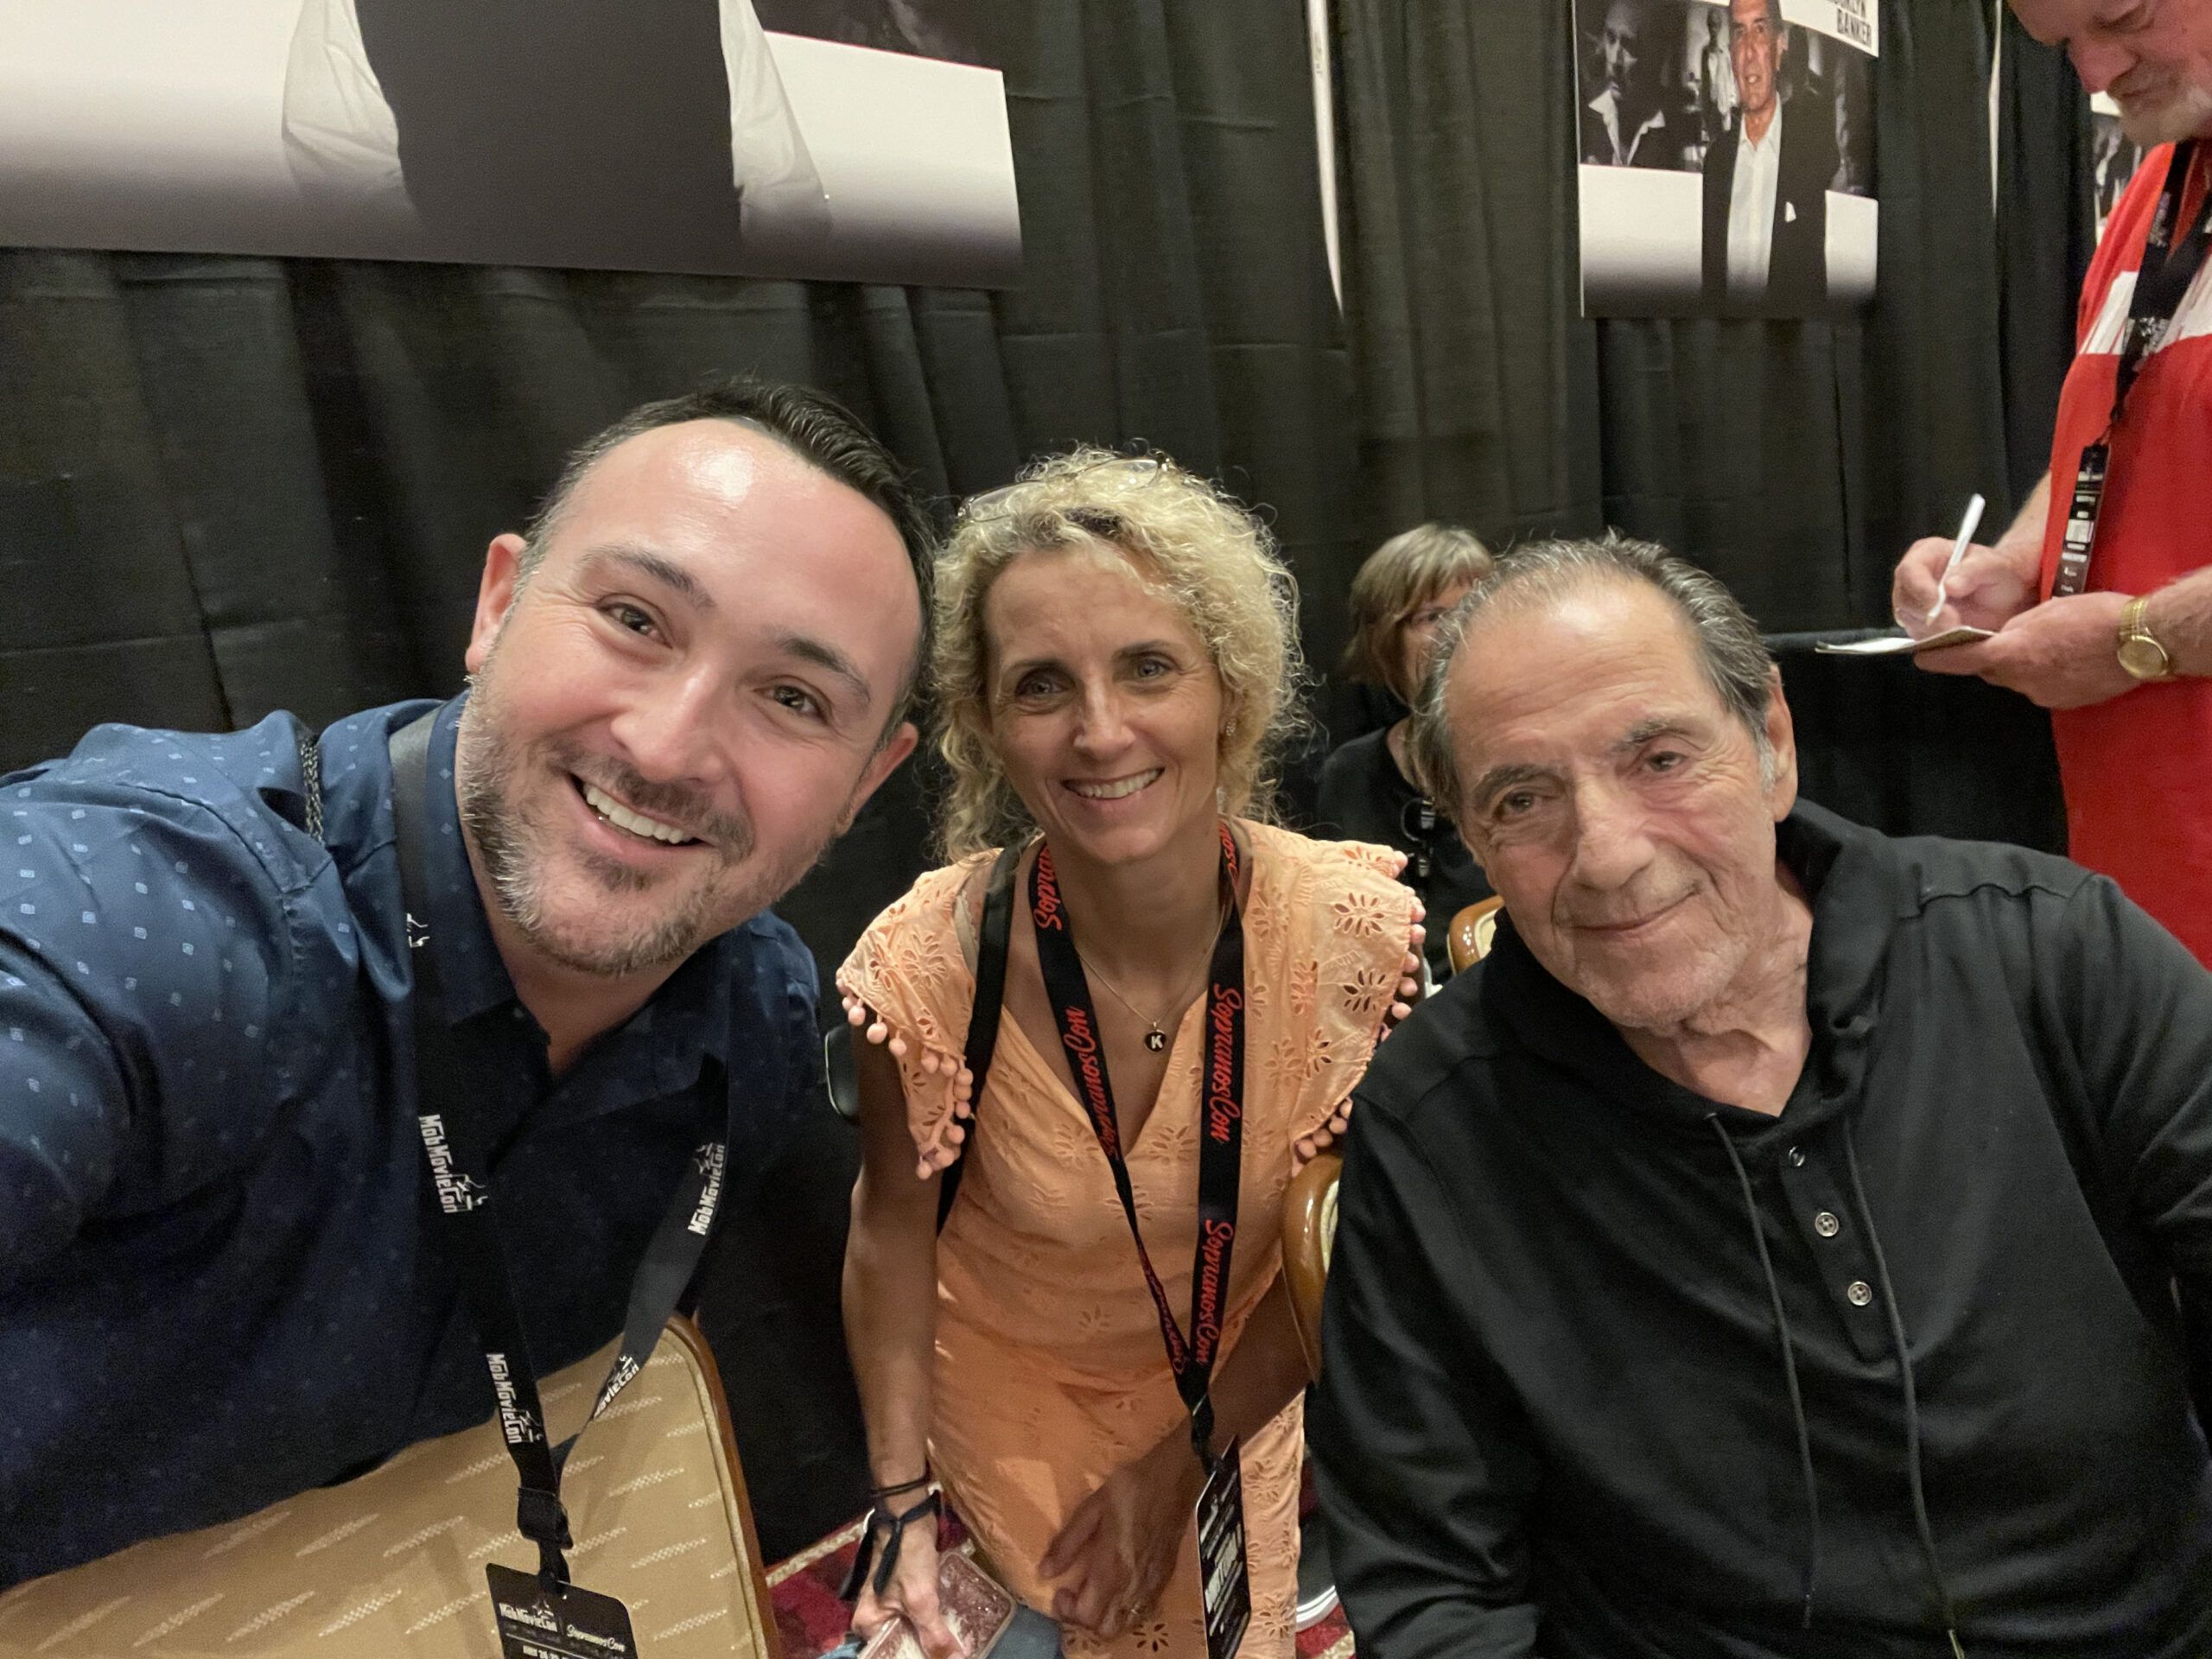 This is a photograph of Ryan Miner and Kimberly Miner with actor David Proval, who played Richie Aprile on The Sopranos.